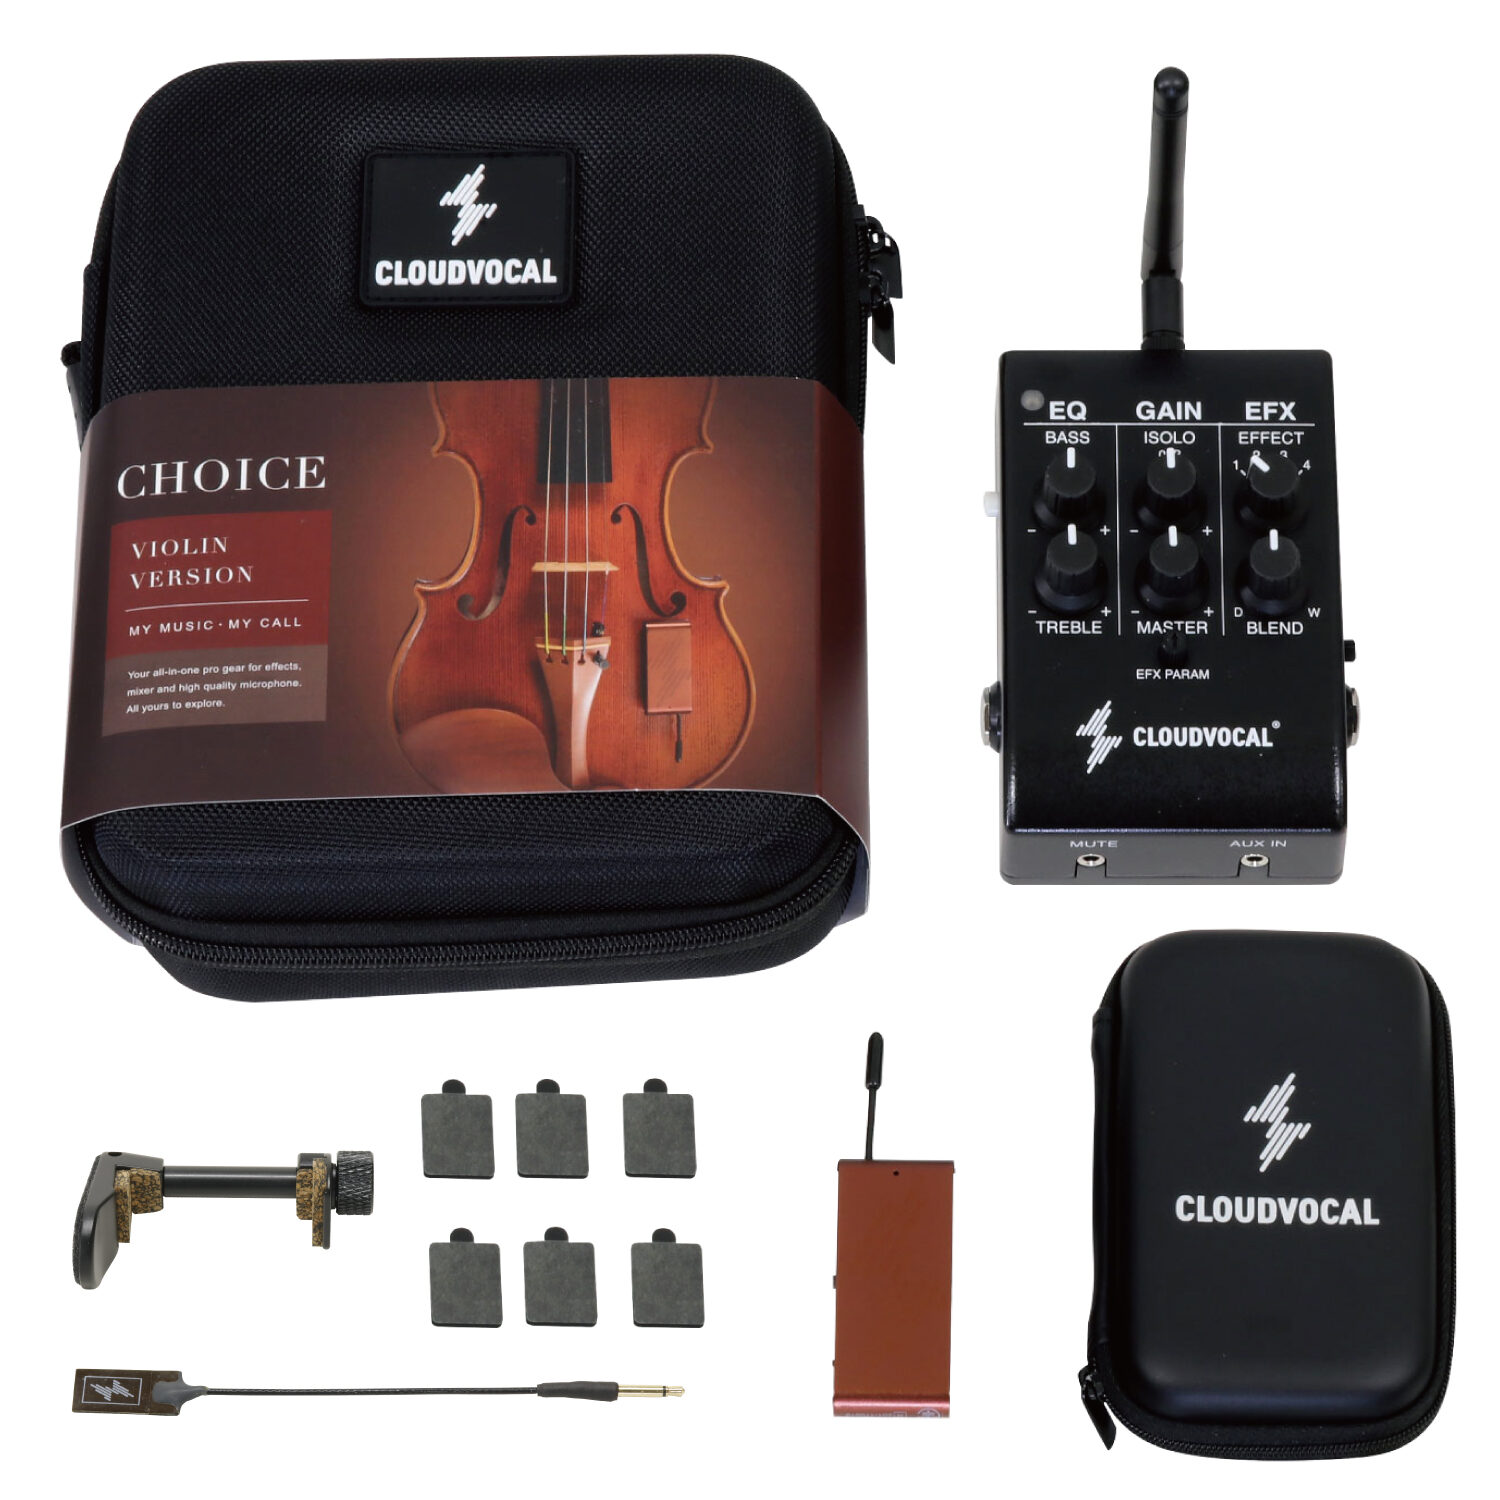 ISOLO_CHOICE_VIOLIN_SWITCHABLE